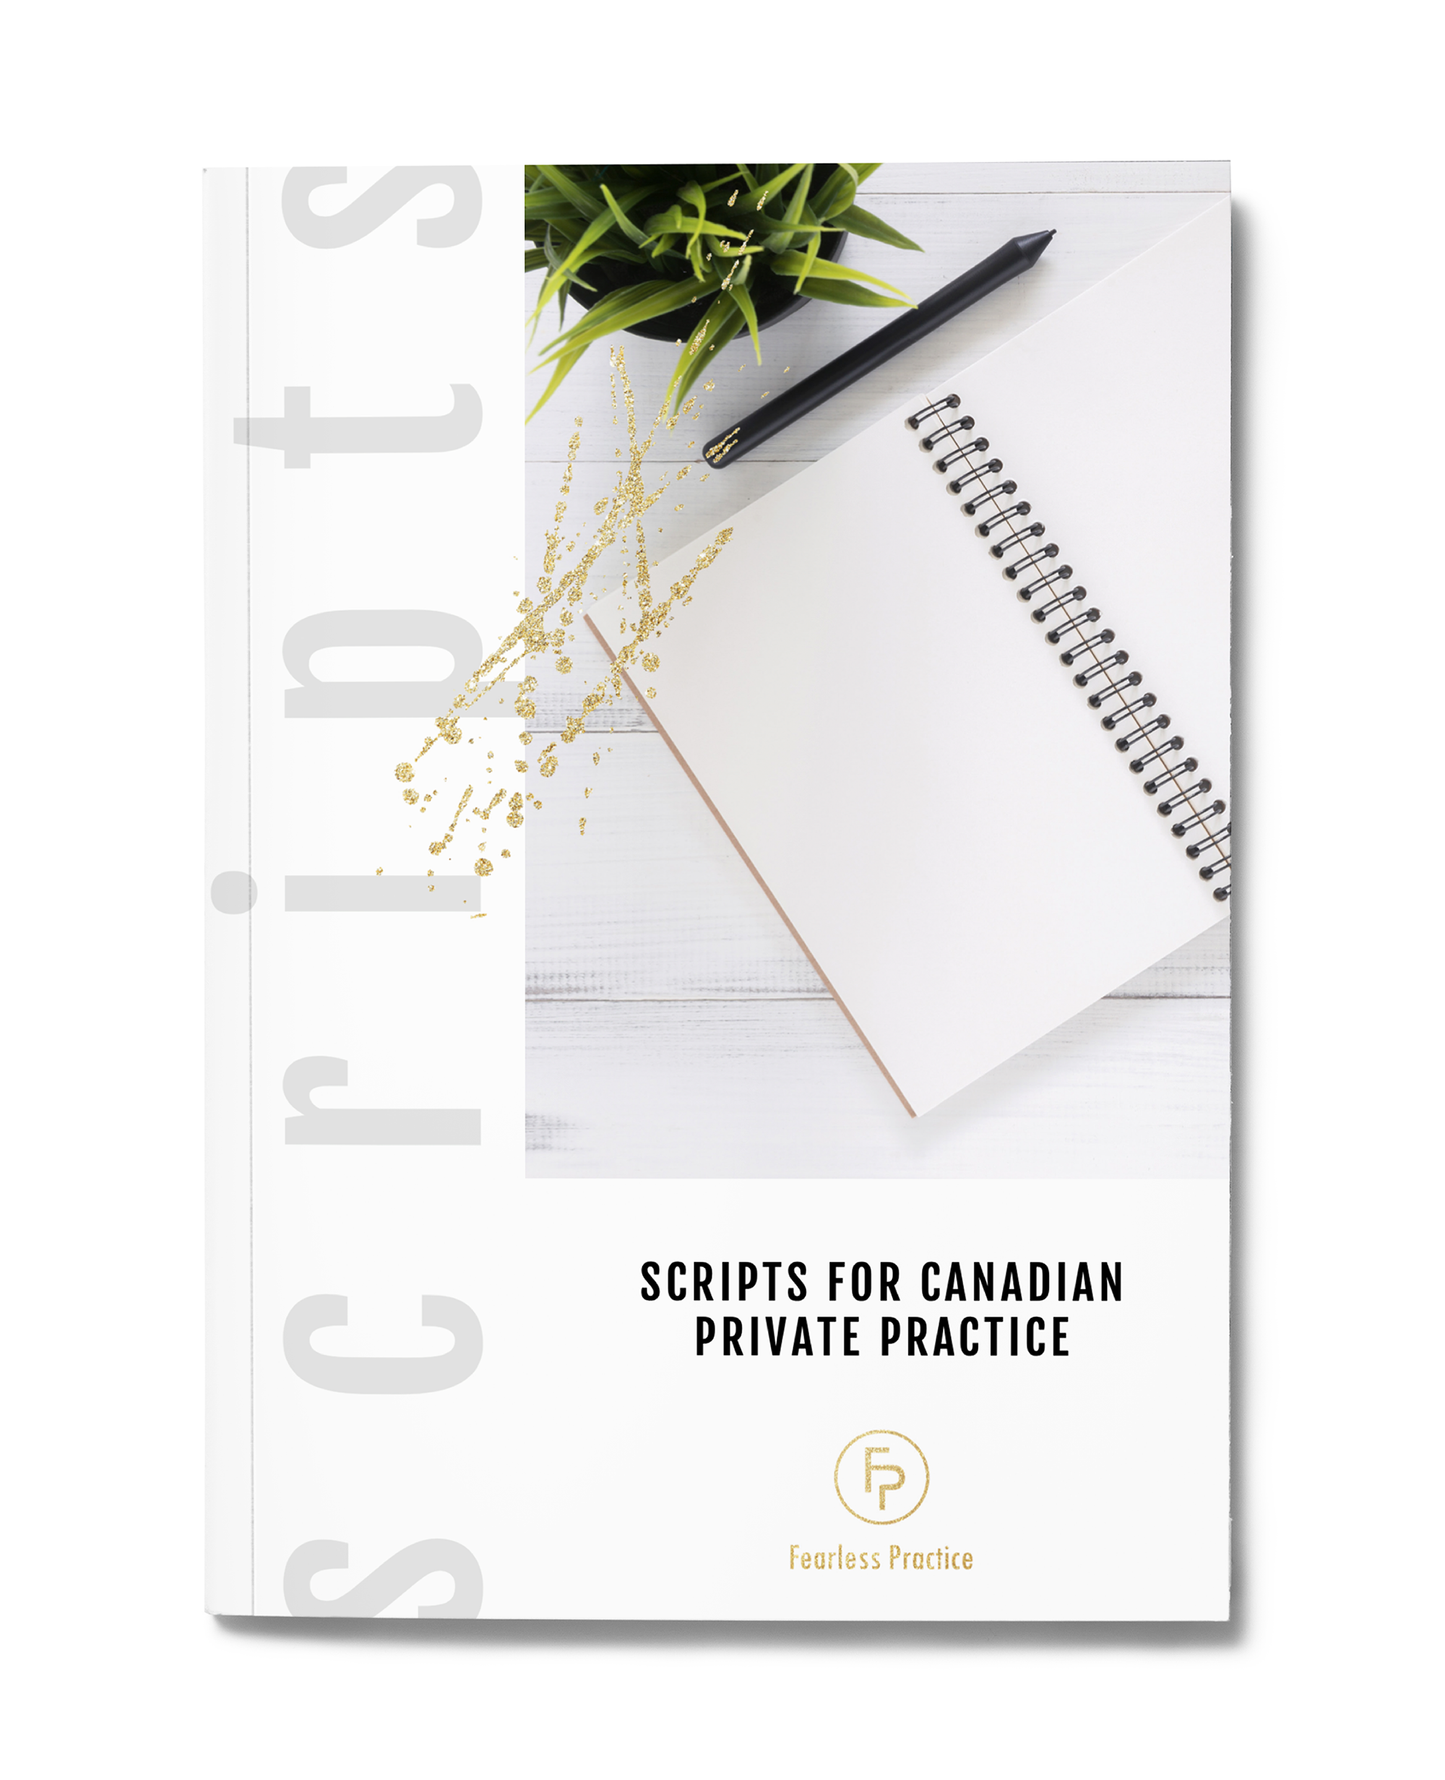 Scripts for Canadian Private Practice